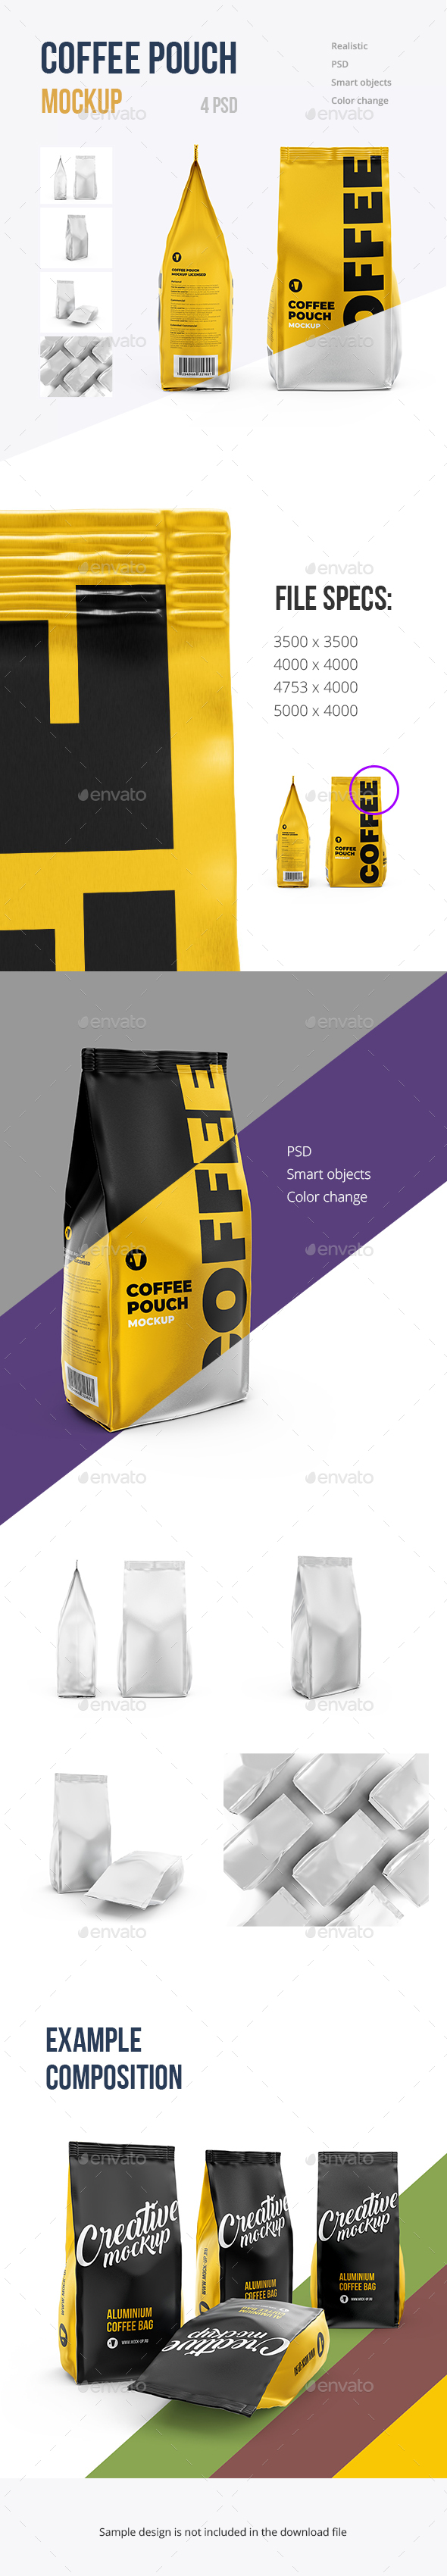 Download Coffee Pouch Mockup Set 4 Psd By Mock Up Ru Graphicriver